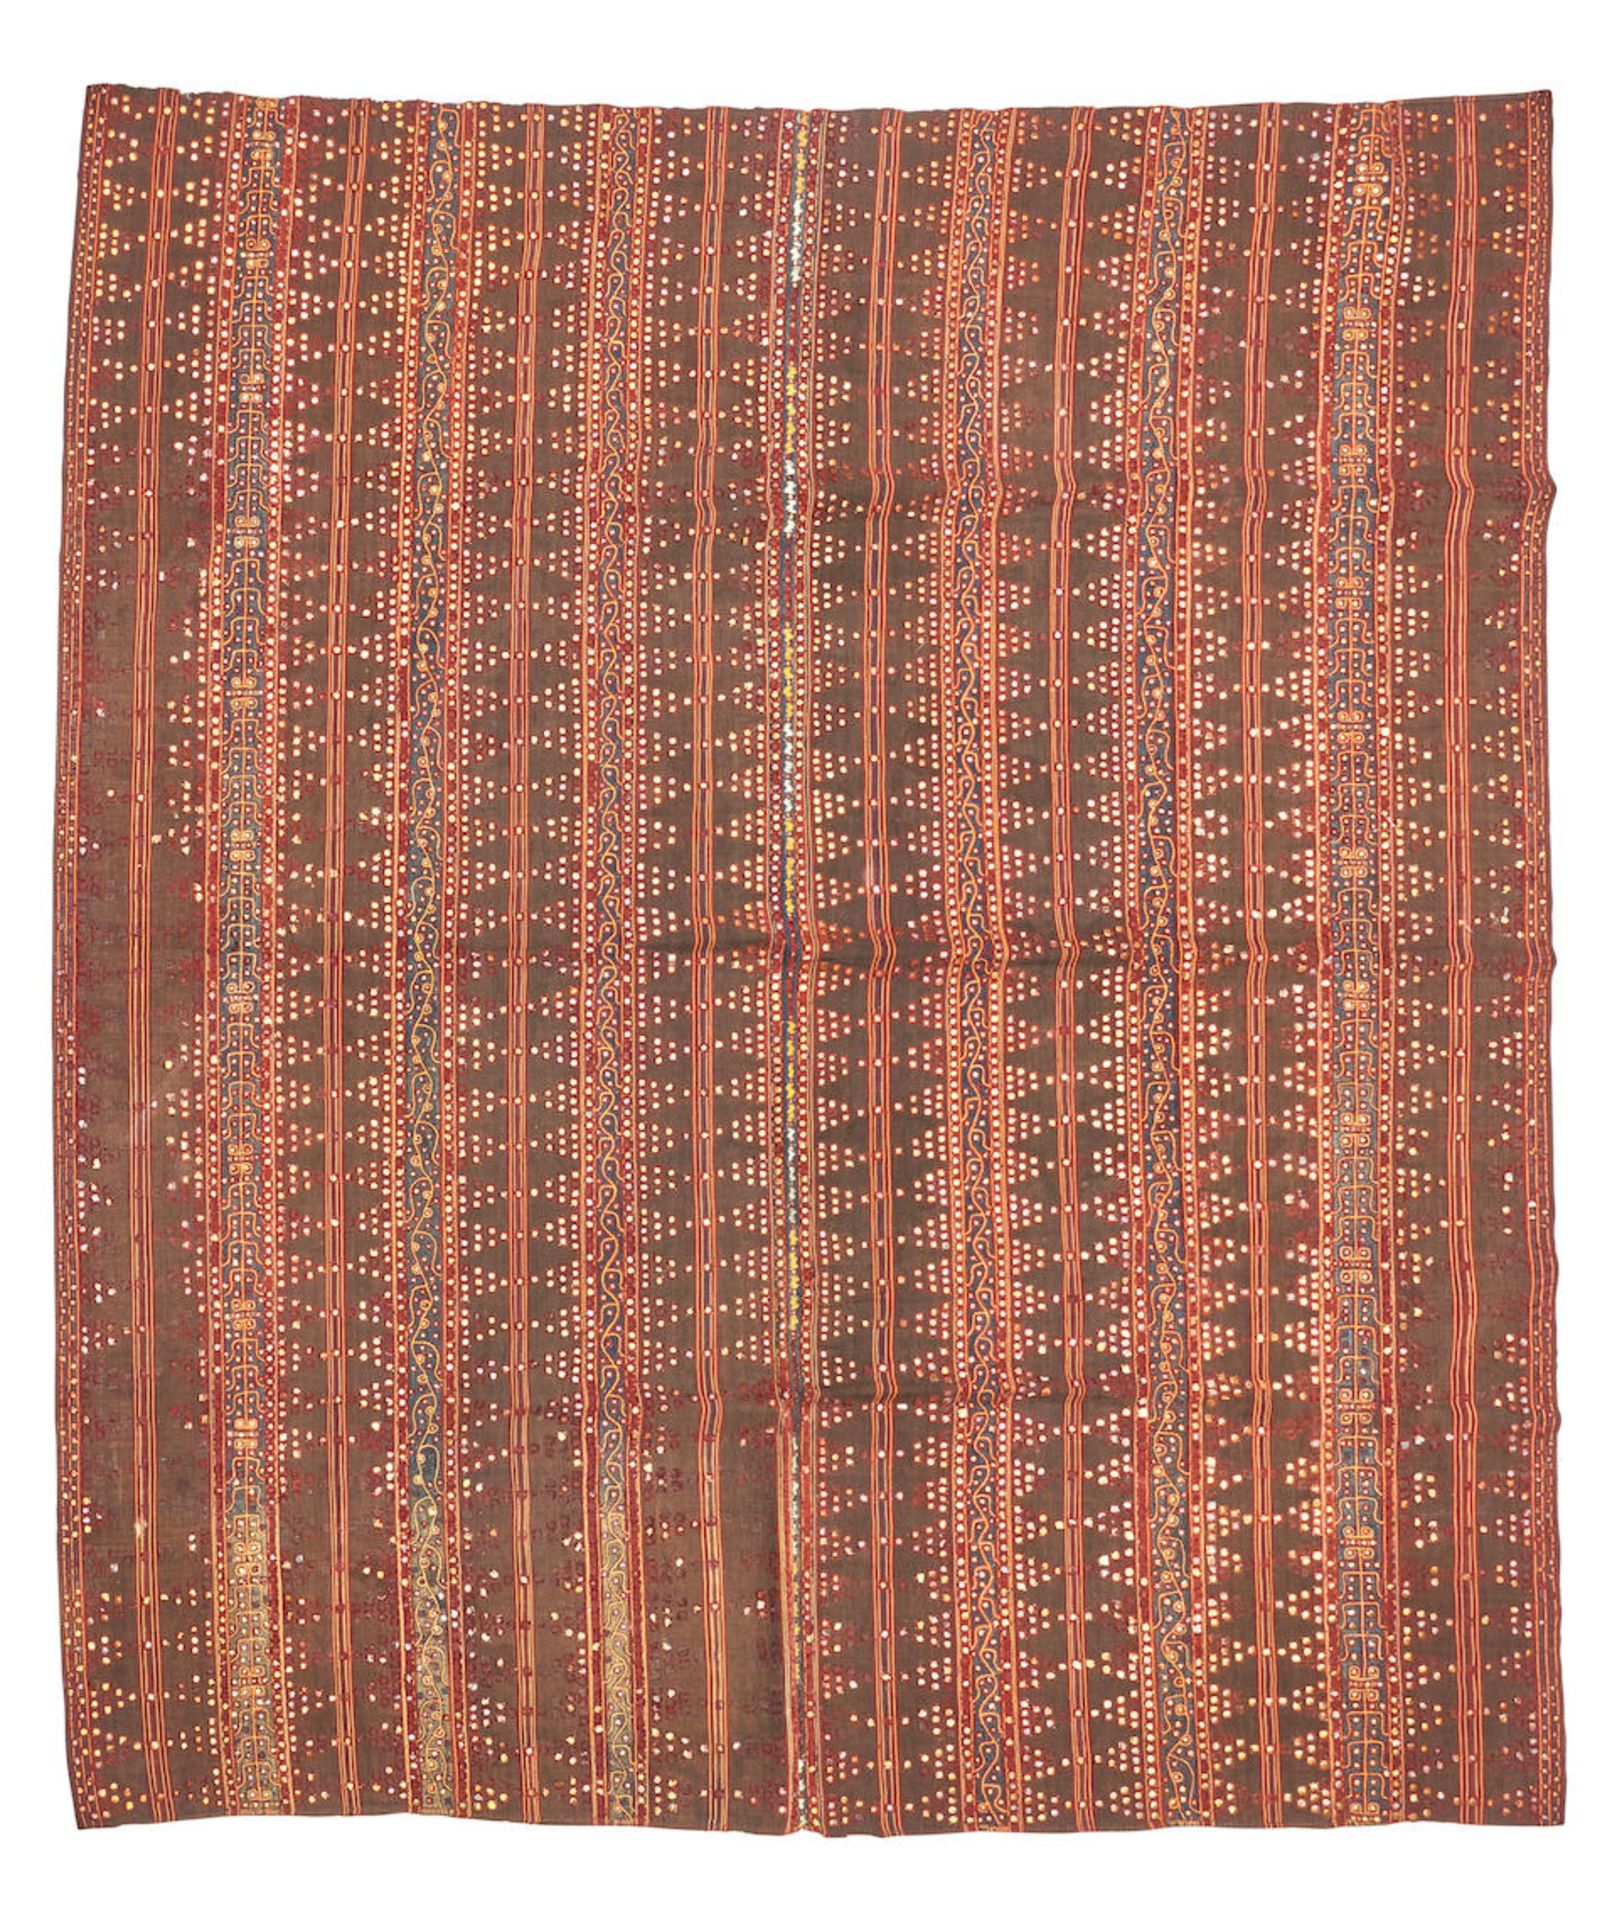 Woman's Skirt Cloth (Tapis) South Sumatra, Indonesia 53 in. x 45 in.